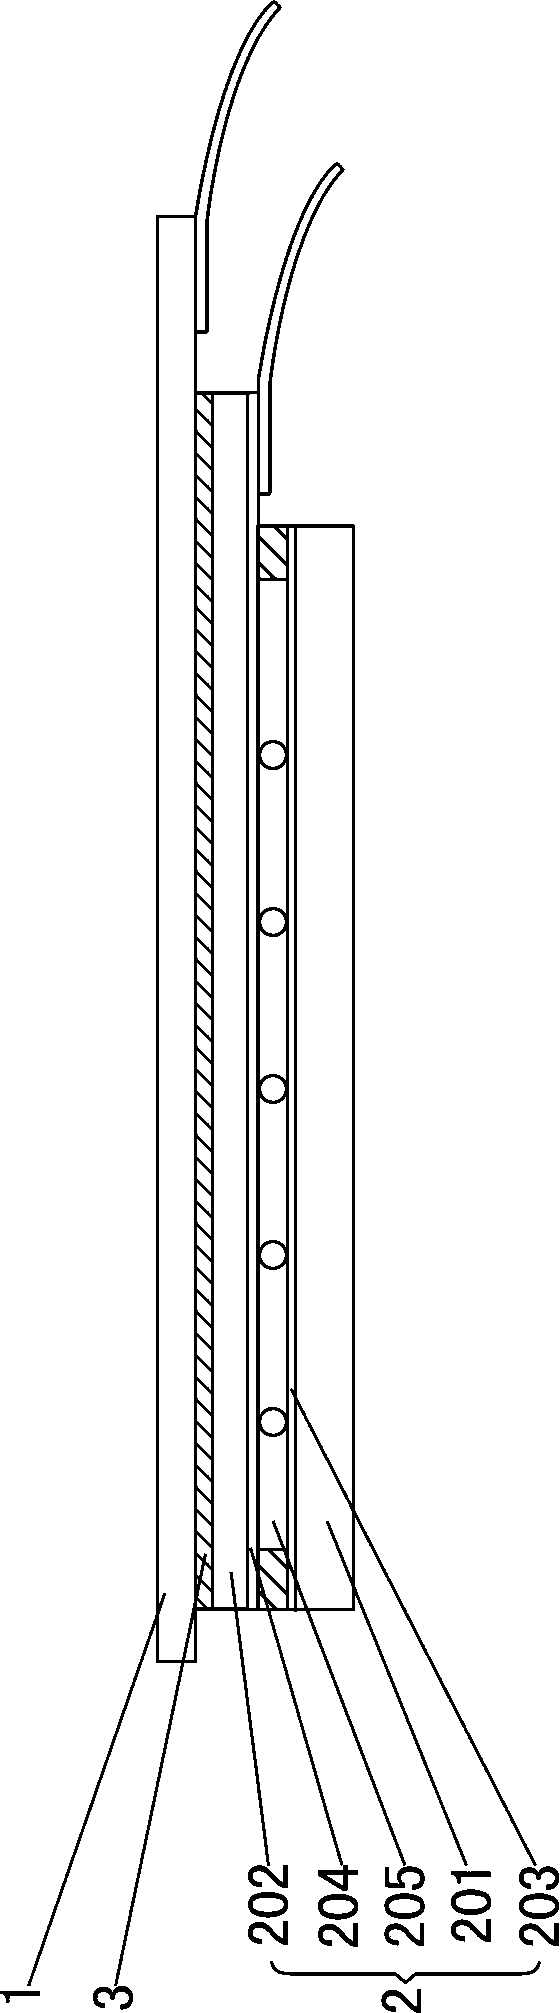 Display device with mechanical sensing function